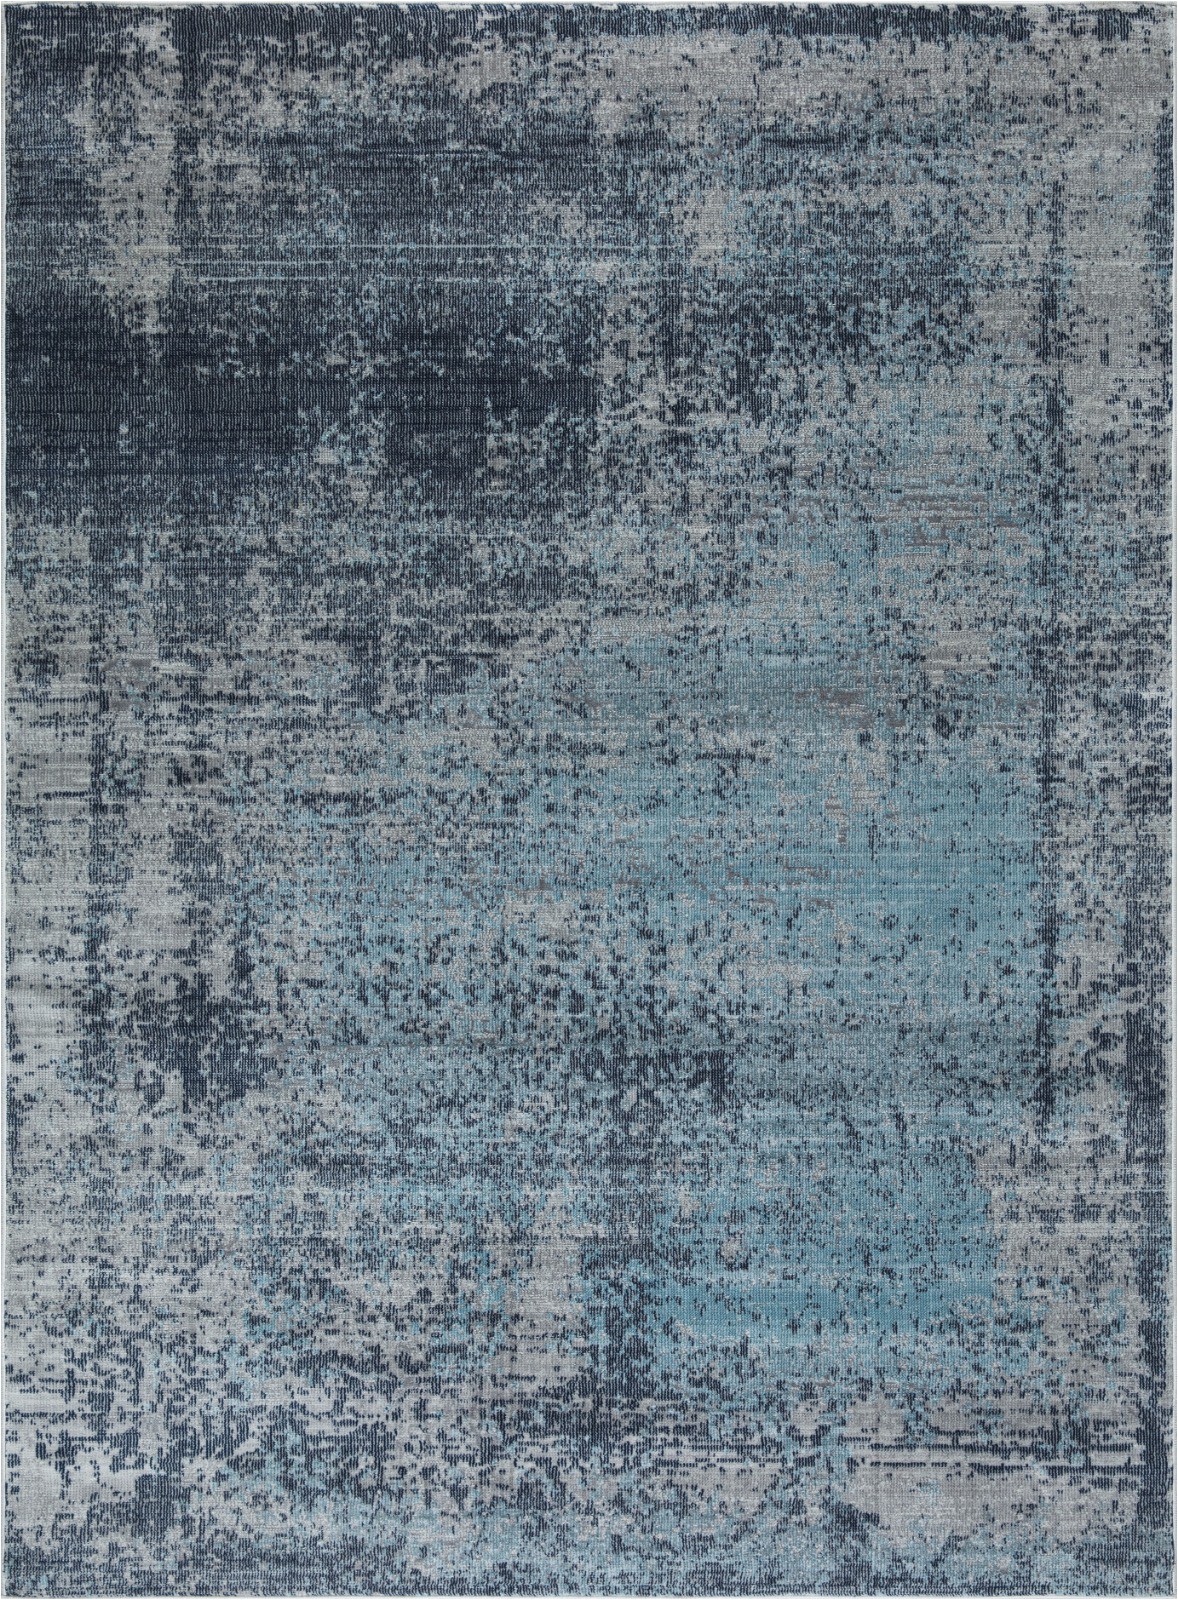 Plush Navy Blue Rug Mod Arte Mirage Collection area Rug Modern & Contemporary Style Abstract soft & Plush Navy Blue Gray